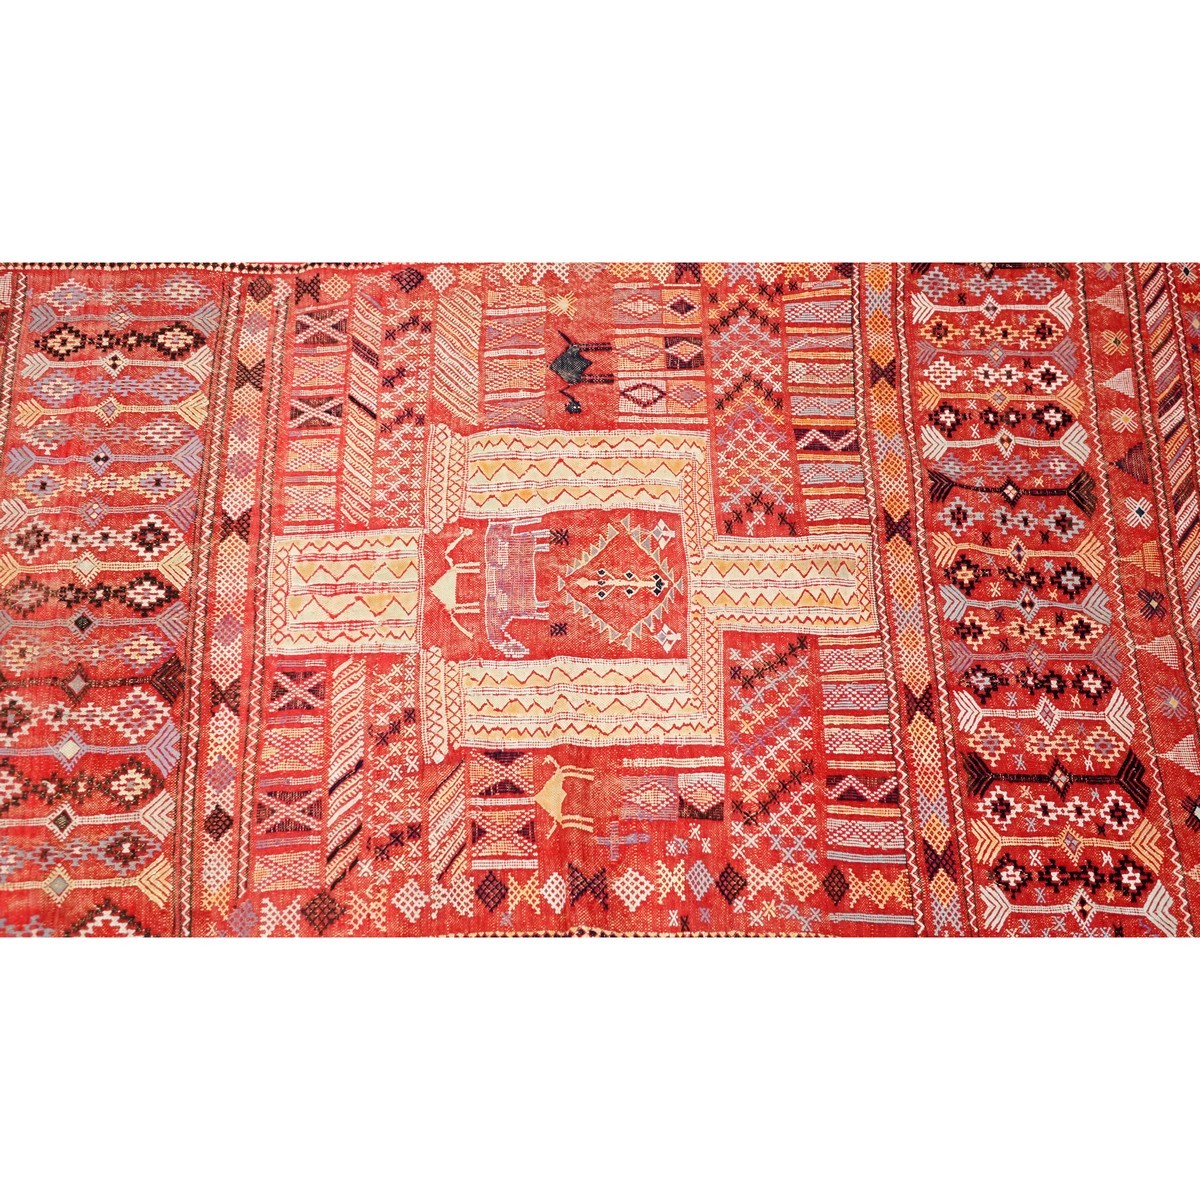 Semi Antique Moroccan Hand Knotted Tribal Rug. Wear to fringes, normal discoloration.